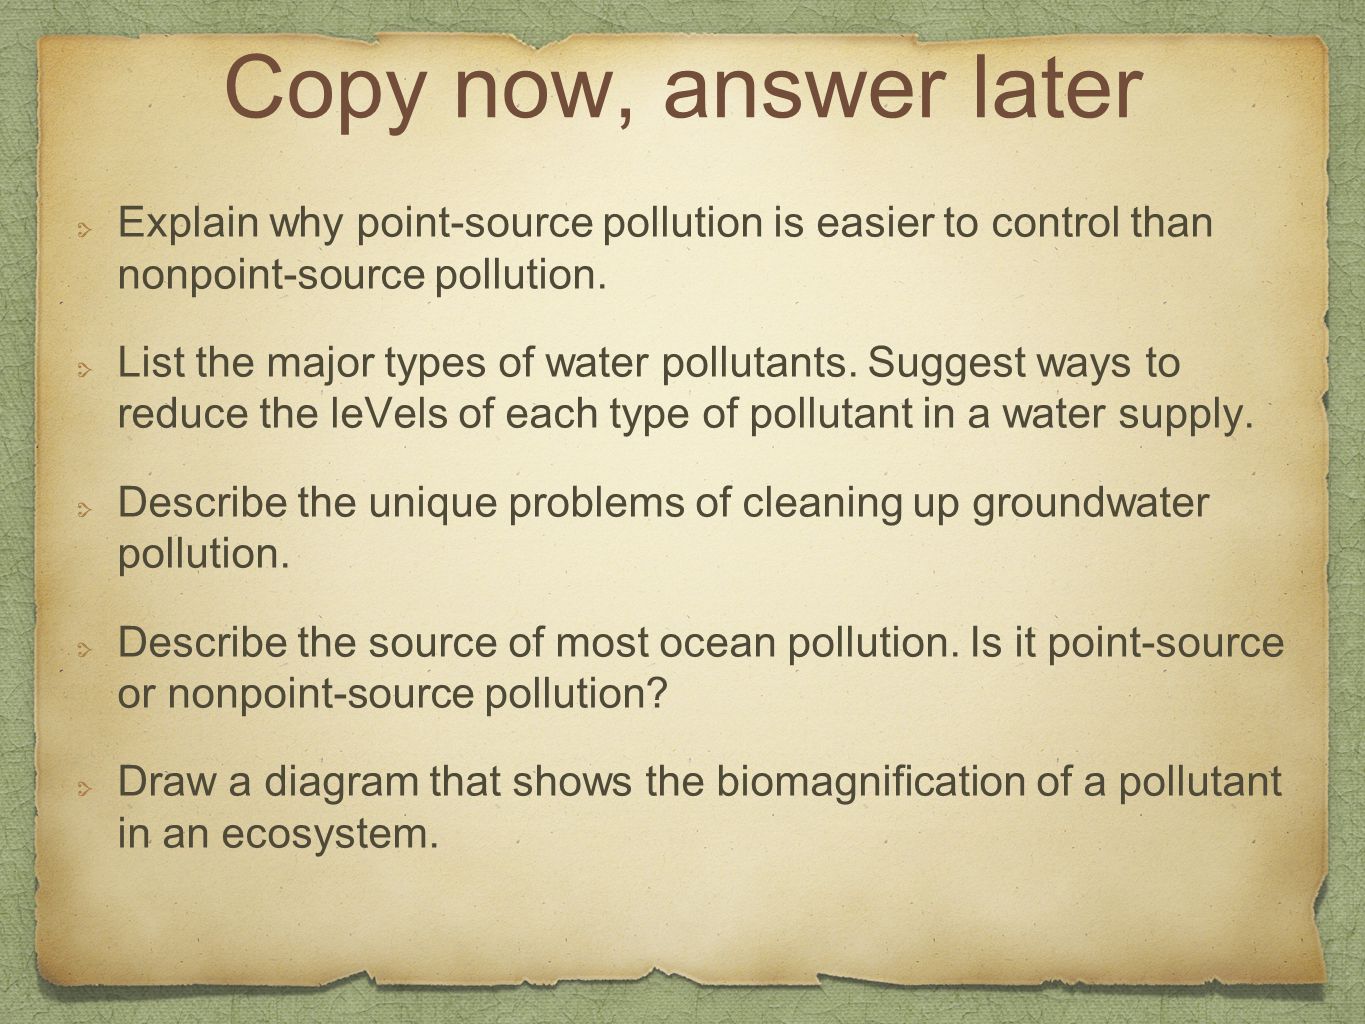 Copy now, answer later Explain why point-source pollution is easier to control than nonpoint-source pollution.